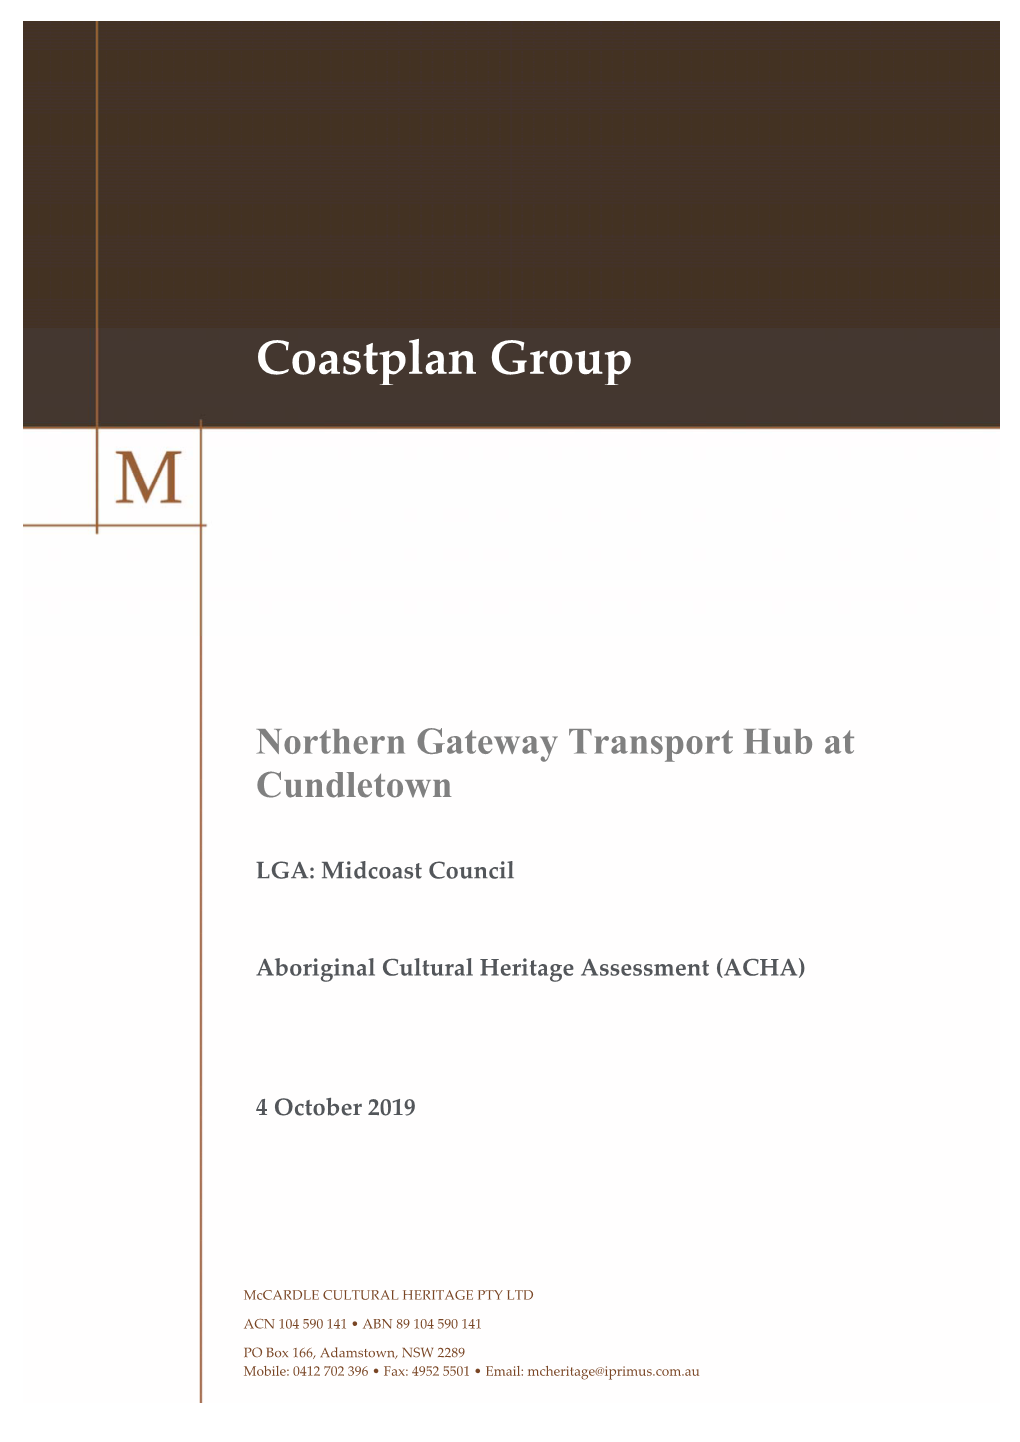 Coastplan Group to Prepare an Aboriginal Cultural Heritage Assessment (ACHA) for the Proposed Northern Gateway Transport Hub Located at Cundletown